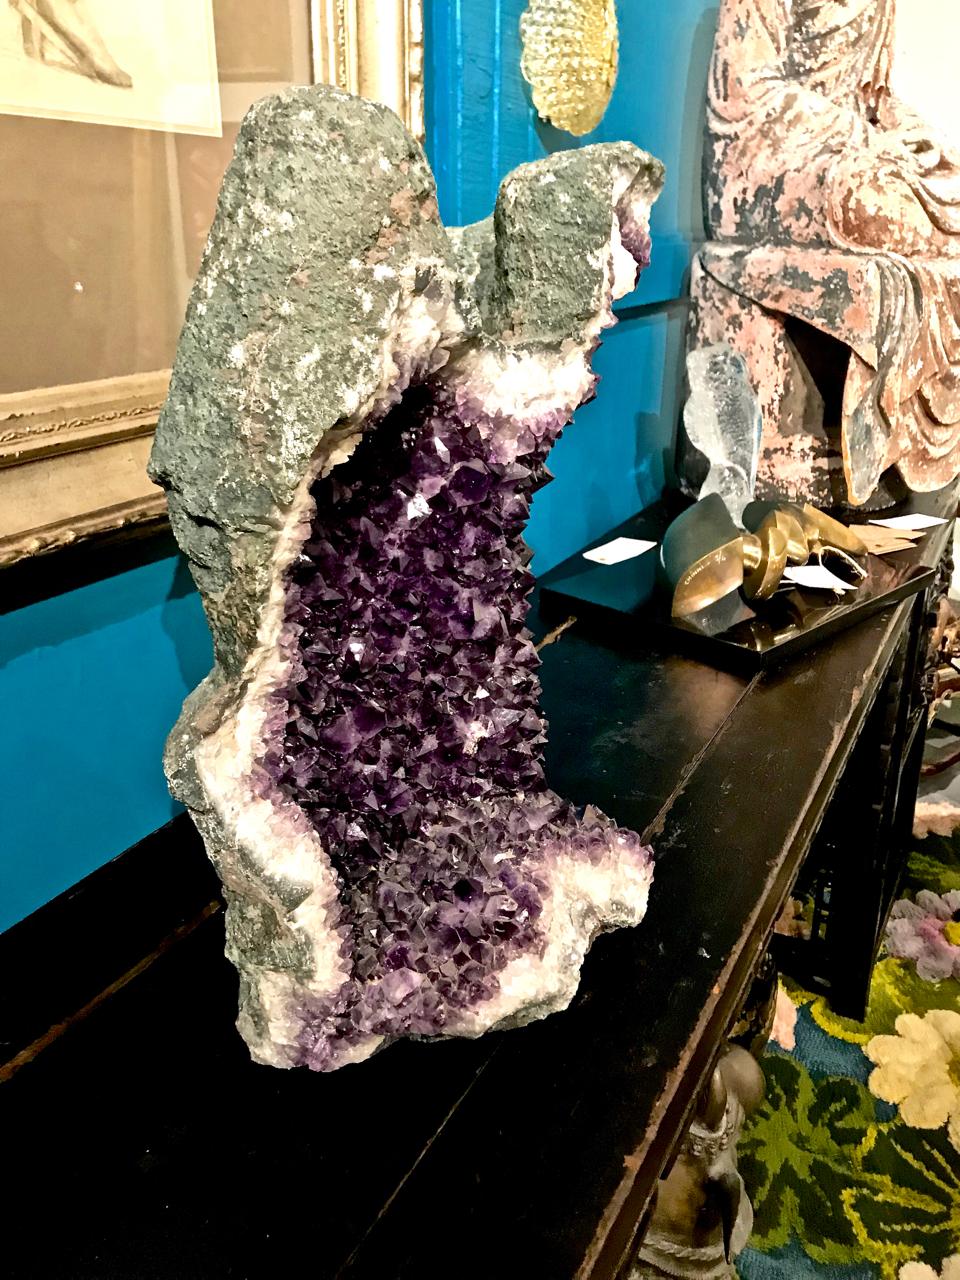 amethyst for sale